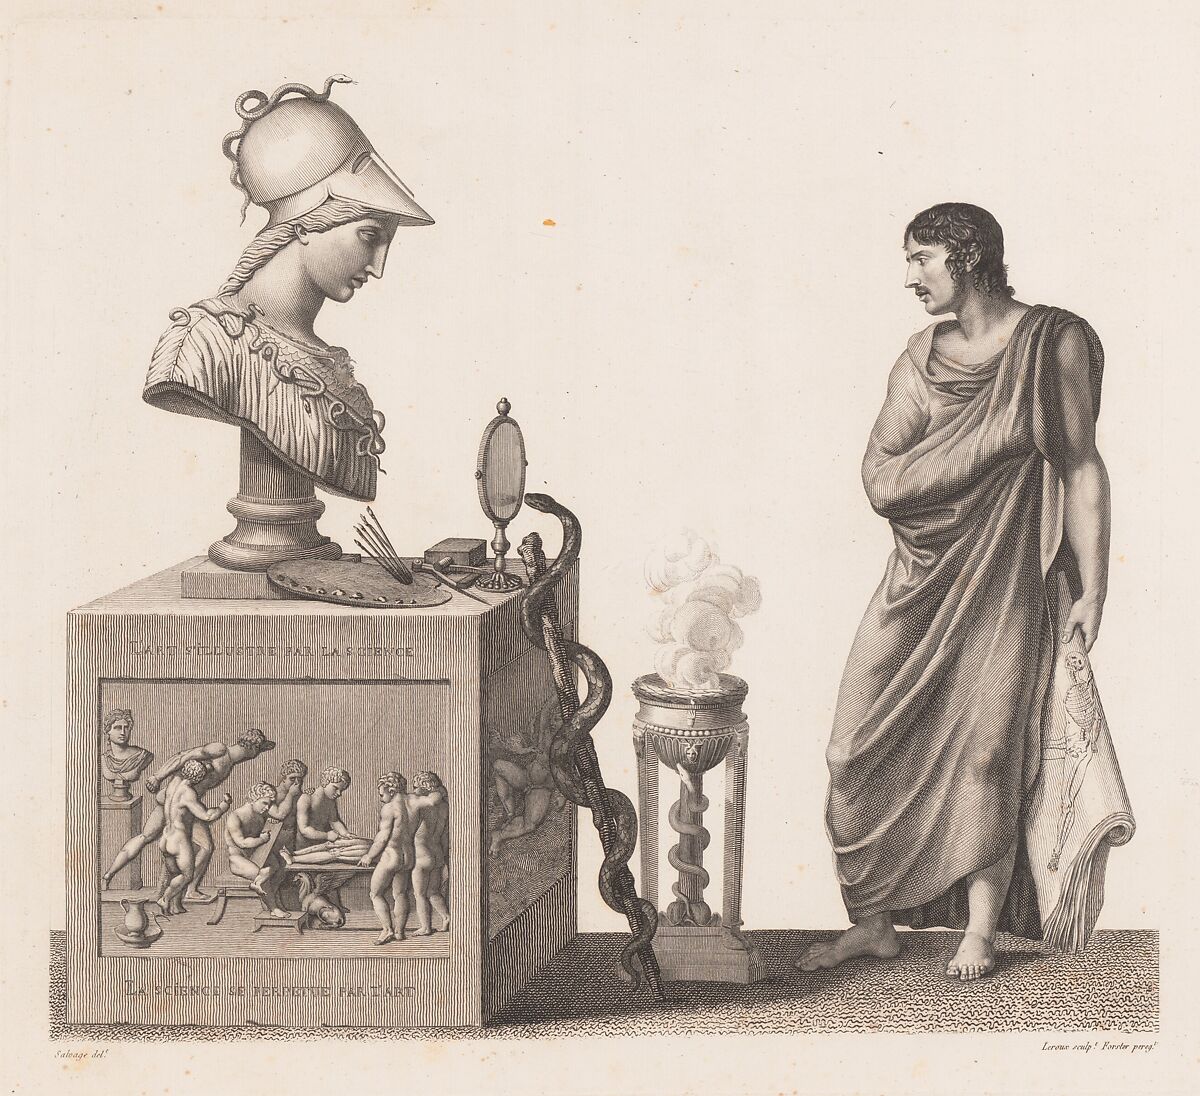 Anatomie du gladiateur combattant applicable aux beaux arts, ou Traité des os, des muscles, du mécanisme de mouvemens, de proportions et des caractères du corps humain (Anatomy of the Fighting Gladiator), Paris (Salvage), 1812, Jean-Galbert Salvage  French, Folio volume (74 pp.) illustrated with 22 engravings printed in black and red ink; bound in red boards; red leather spine with gold-stamped ornament